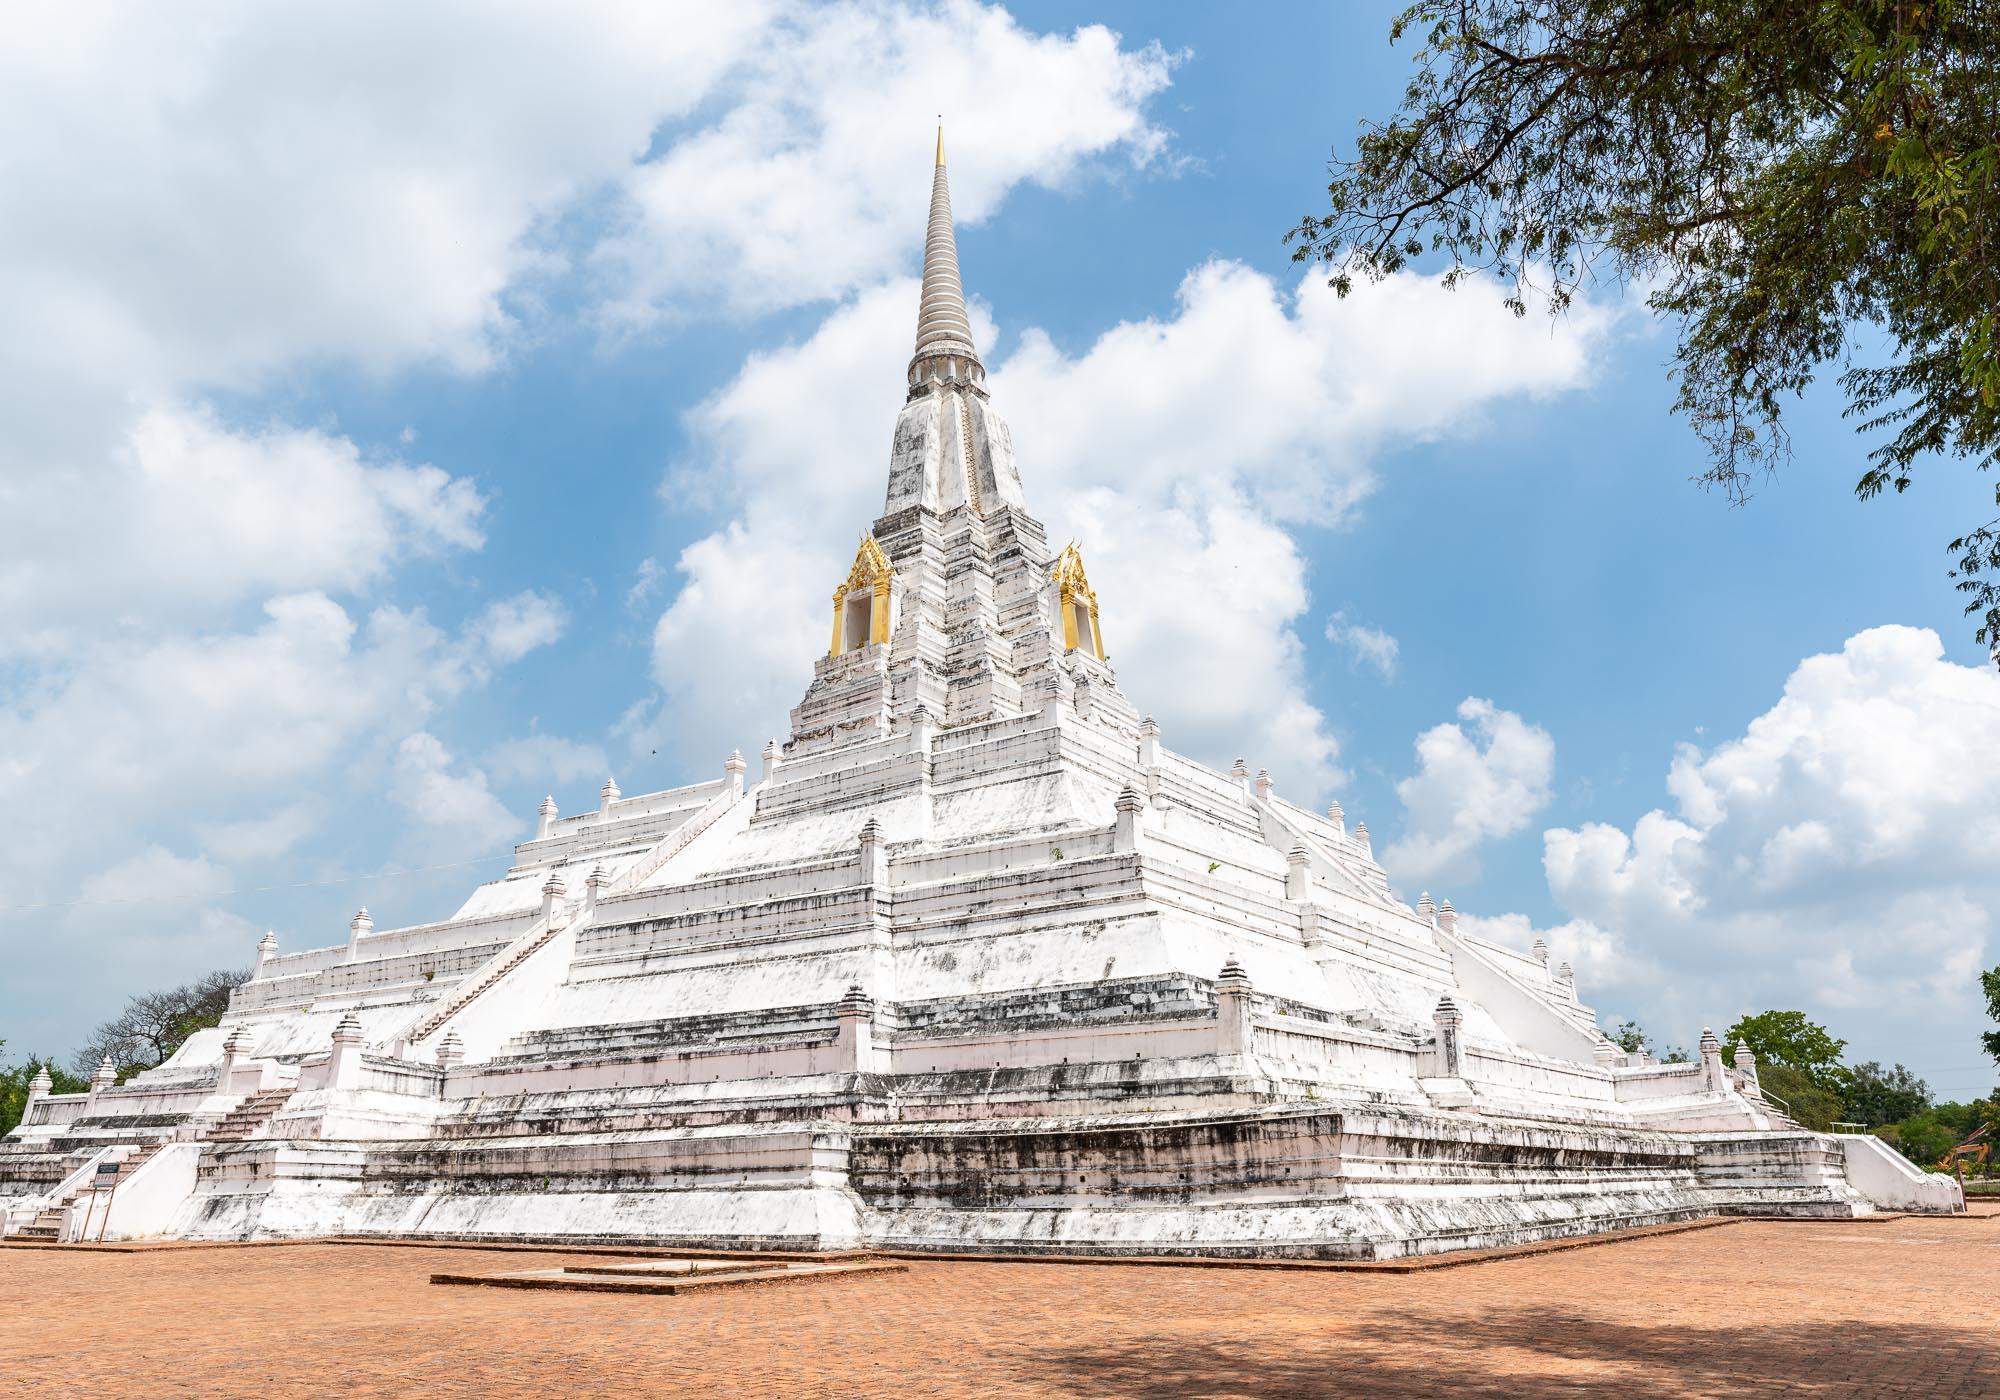 The 50-metre-high stupa of Wat Phu Khao Thong, first built in 1569 and the tallest temple building in Ayutthaya. – © Michael Turtle